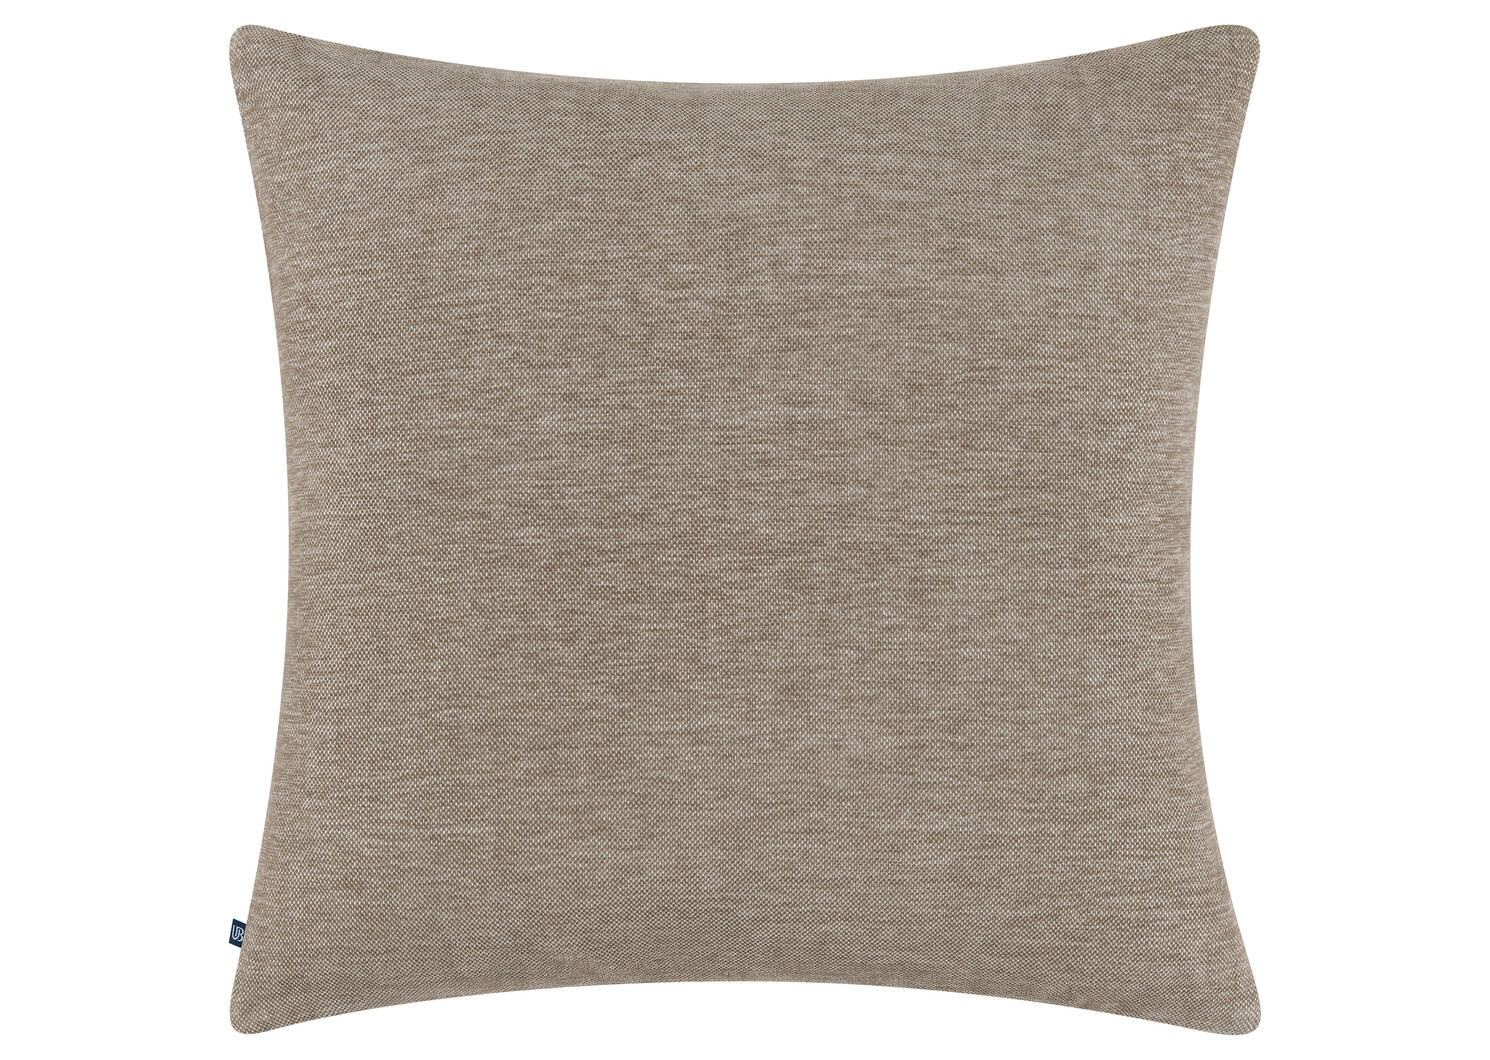 Perl Embroidered Pillow 20x20 Ash